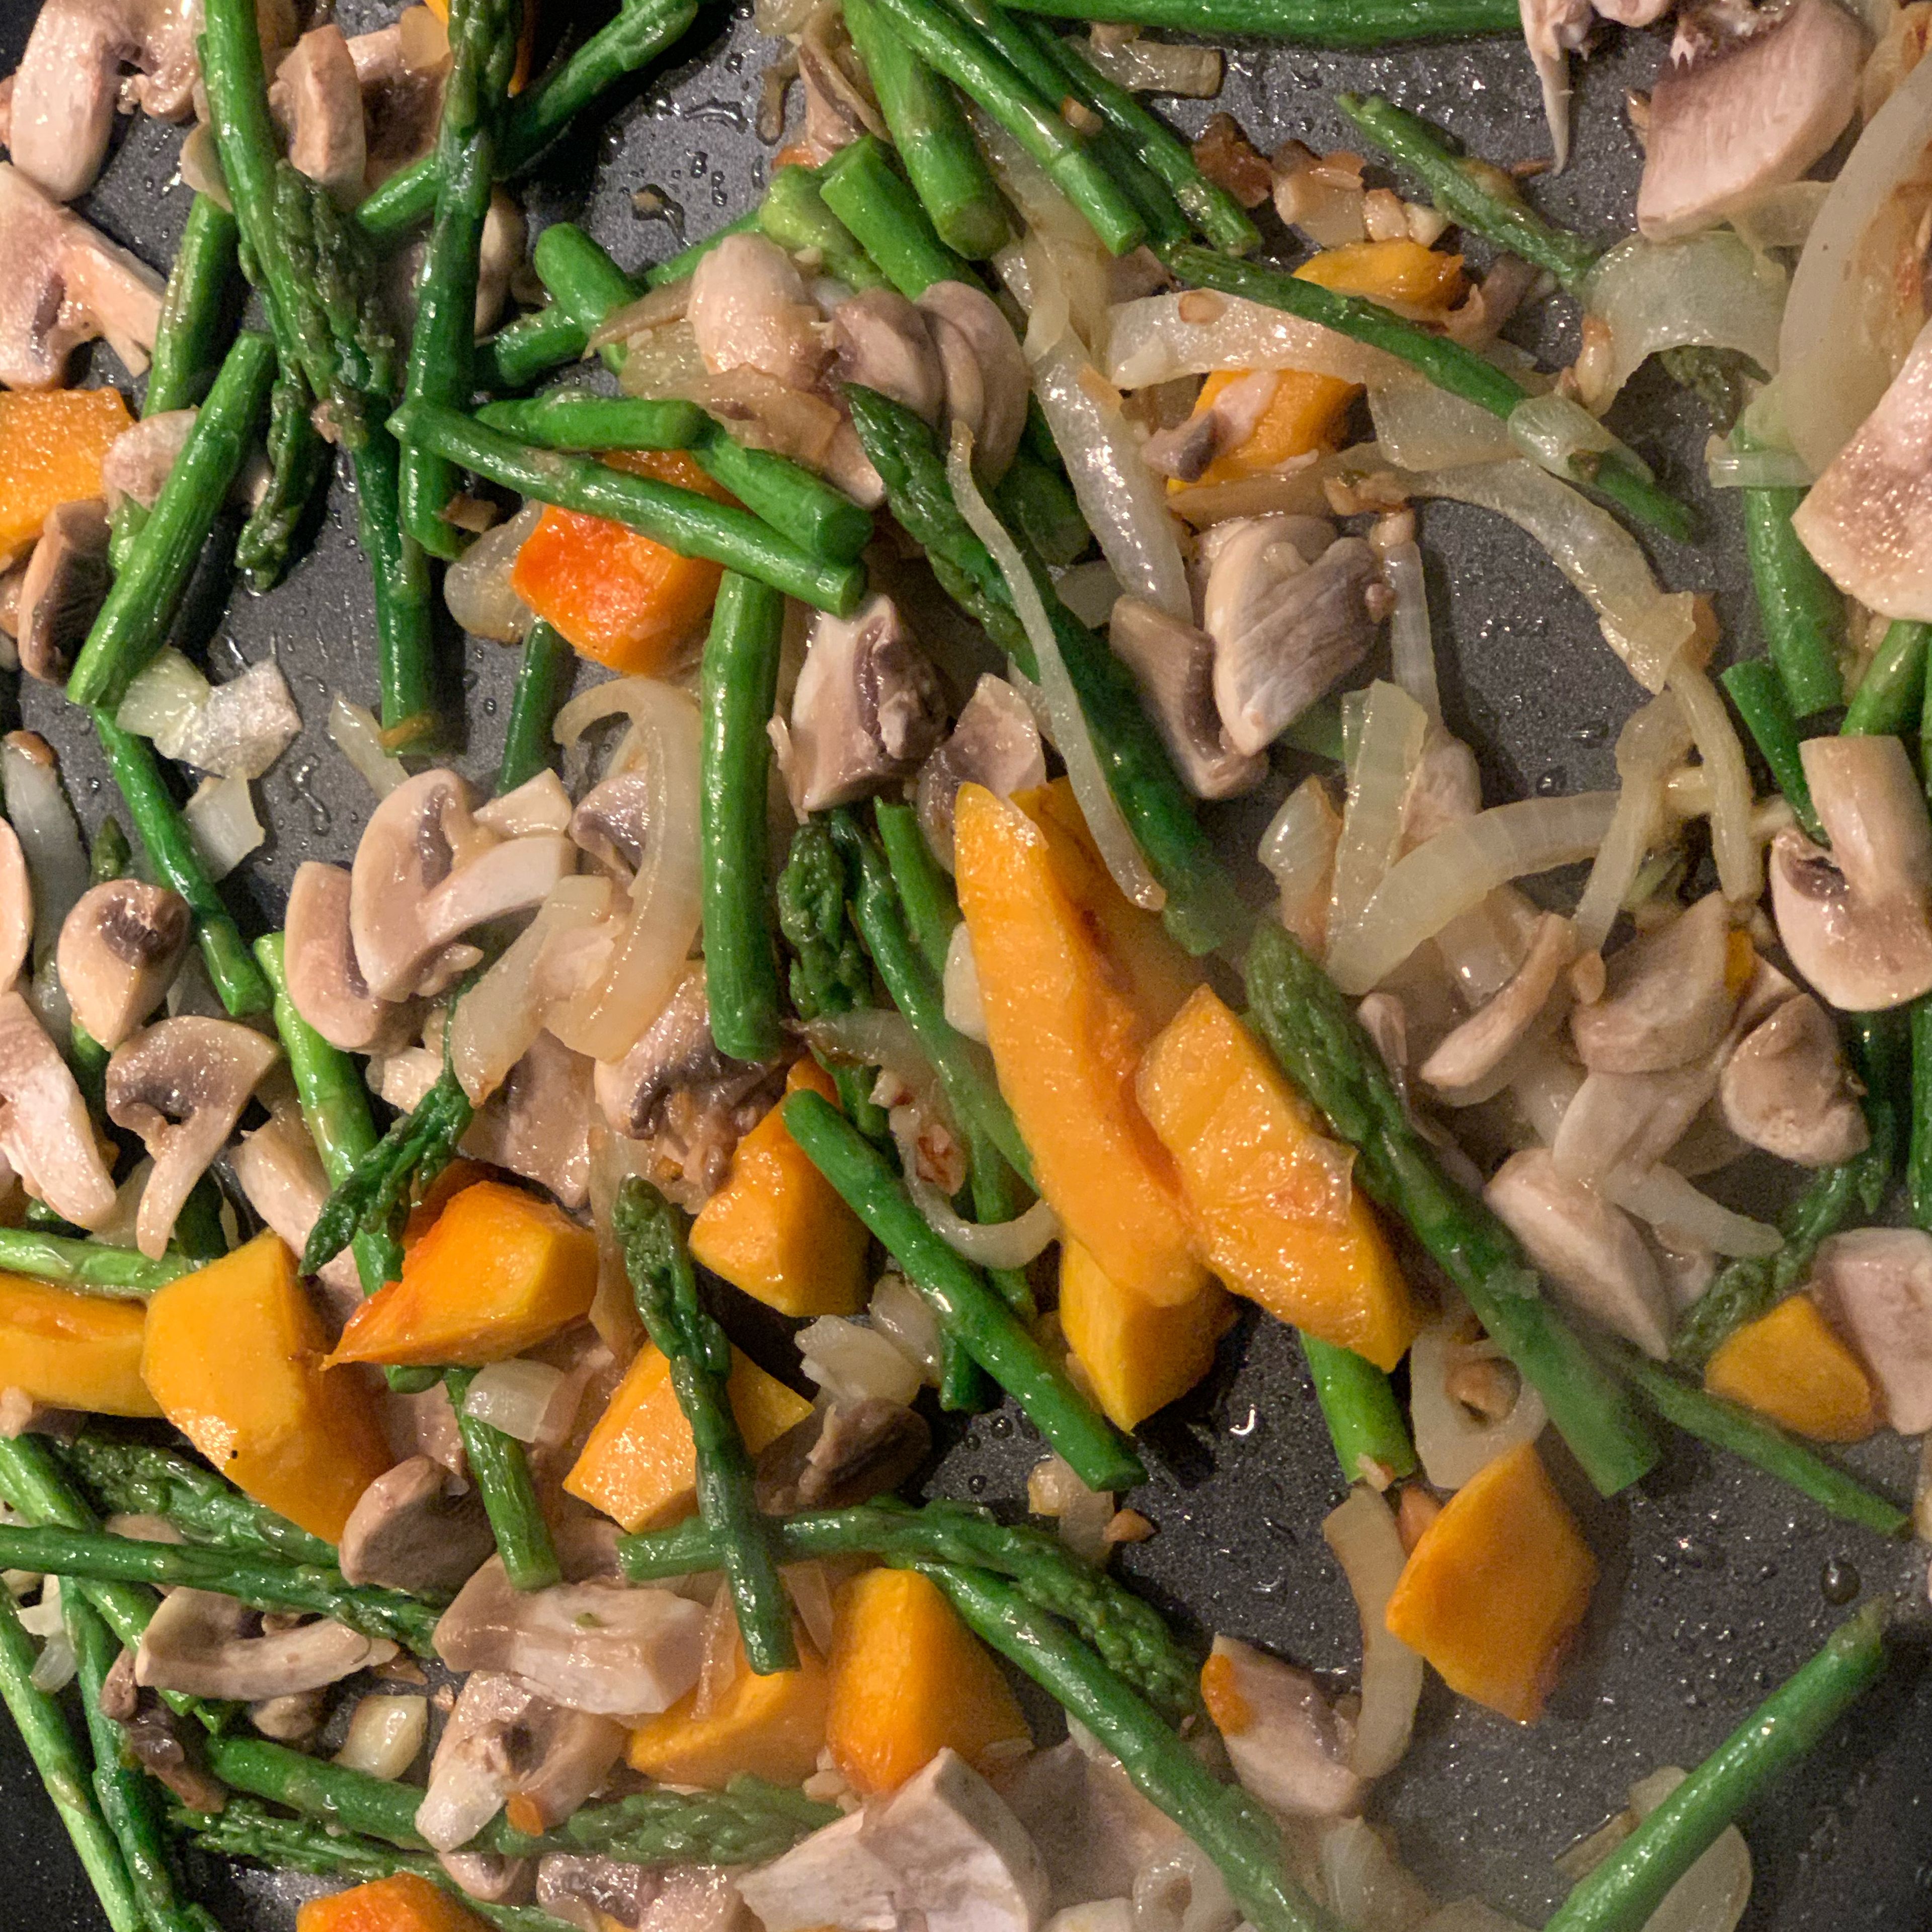 When hot but not smoking add onion and garlic and cook for about 2-3 min. Then add pumpkin and asparagus and sauté for 5-7 min or tender. Finally add mushrooms and season with salt and pepper.